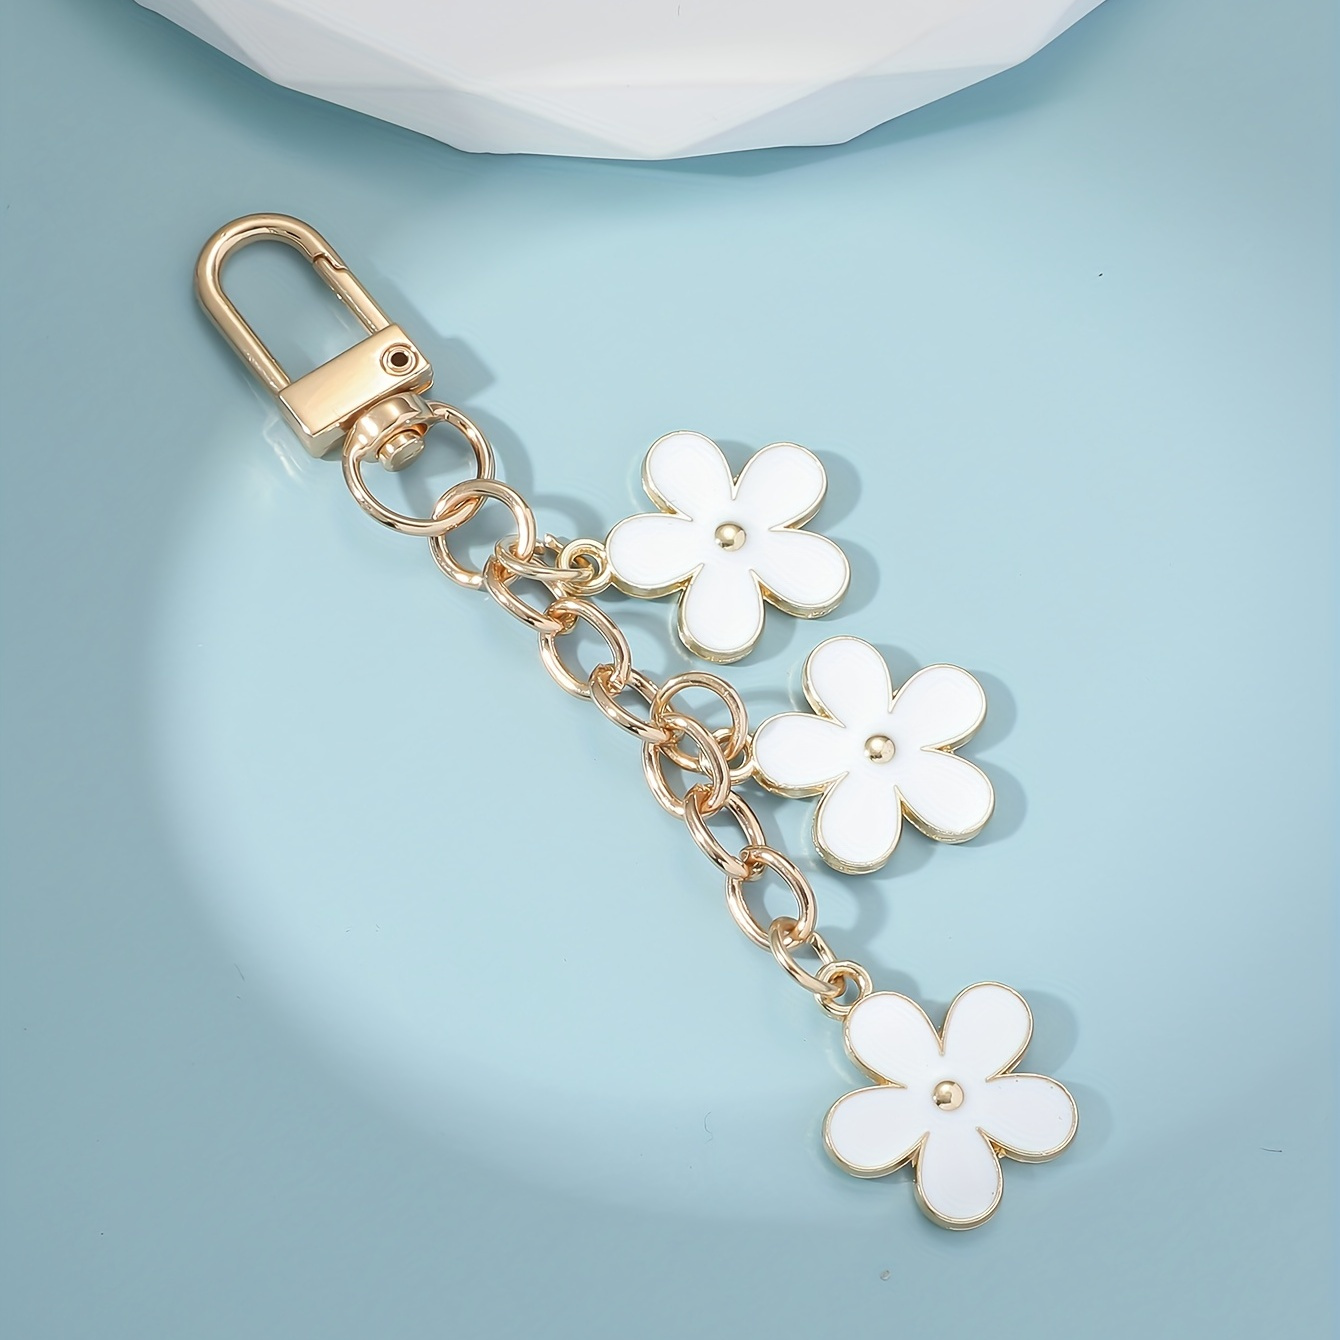 Wholesale Cherry blossom Metal Design Spring Snap Keychain Clip Creative  Hanging Buckle Key Ring For DIY Key Chains Accessories From m.